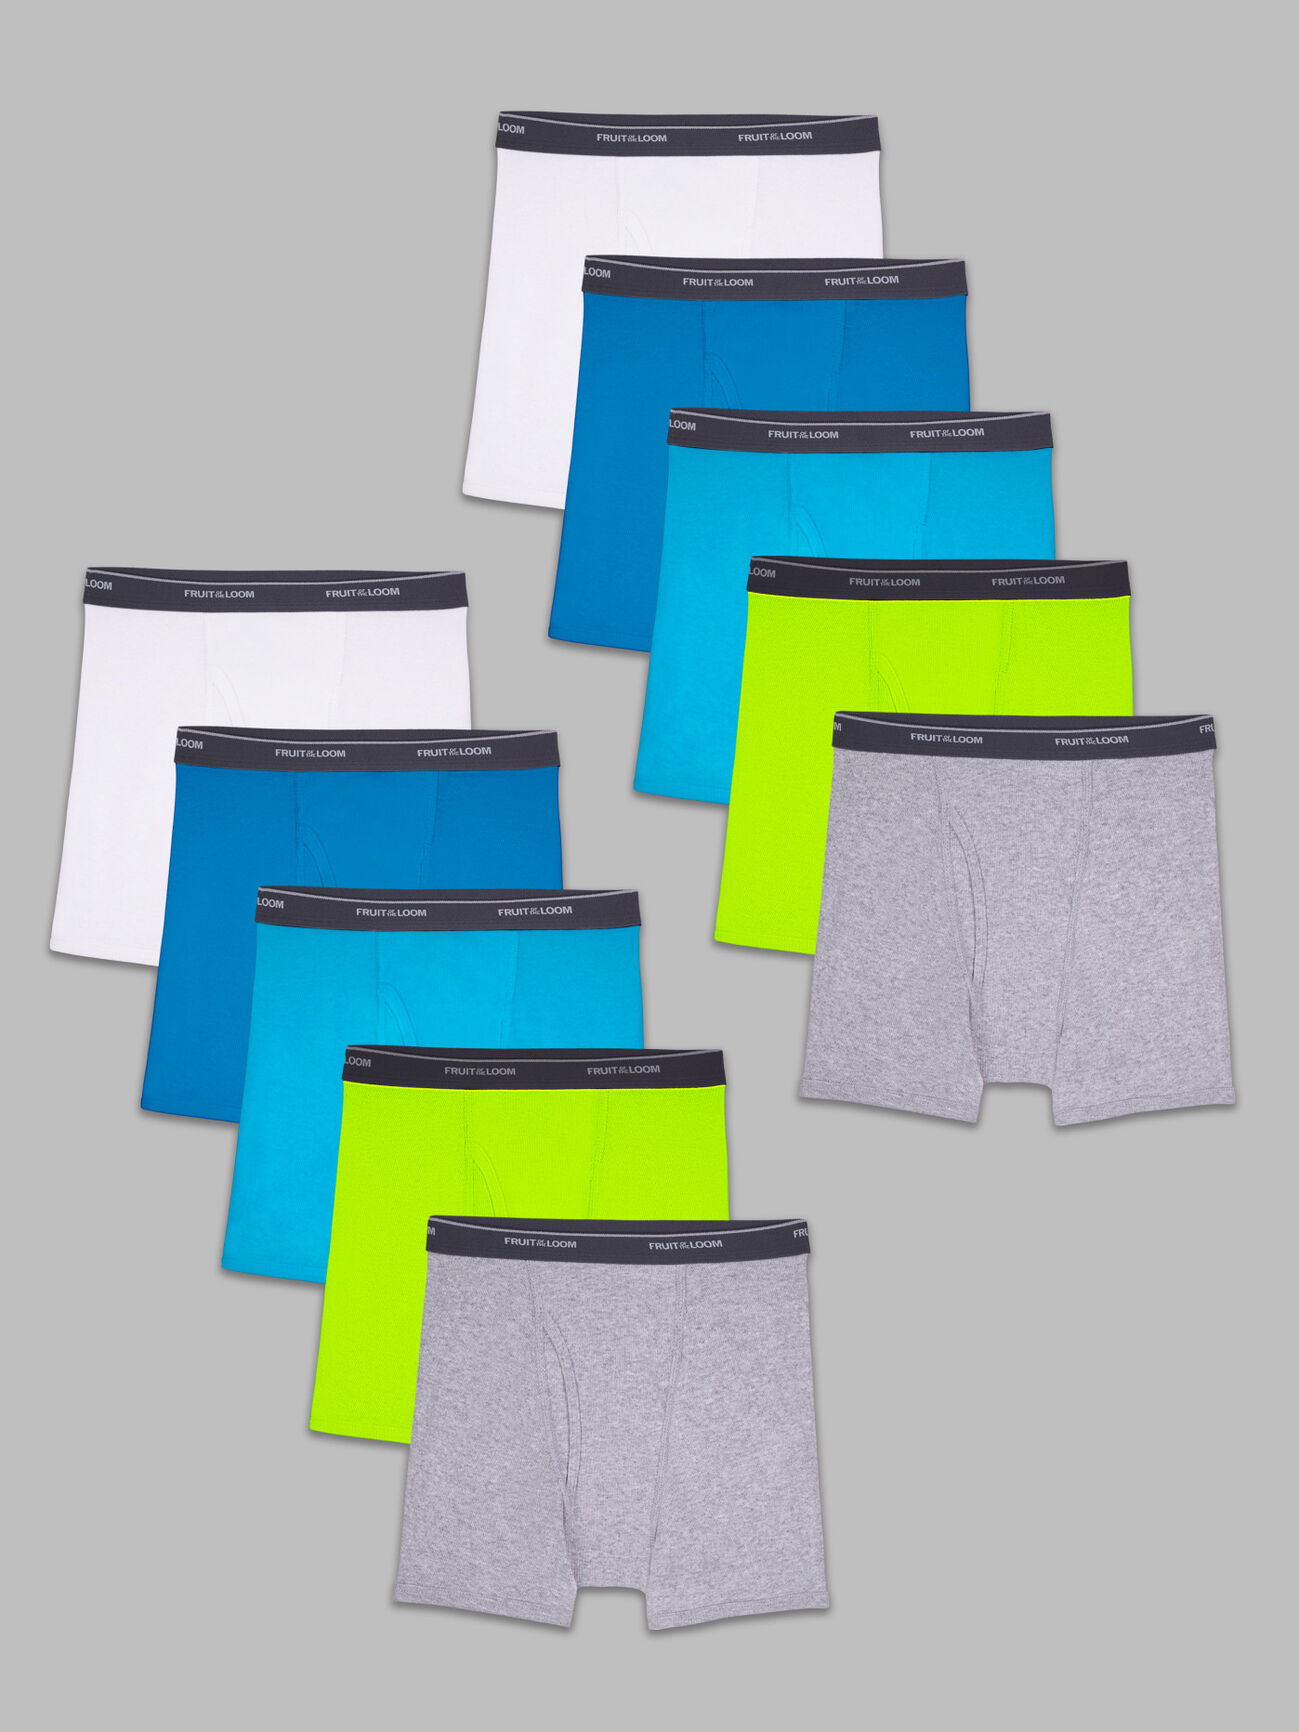 12 Pack of Mens Boxer Briefs Underwear Bulk, 100% Cotton, Soft,  Comfortable, Assorted Colorful Brief